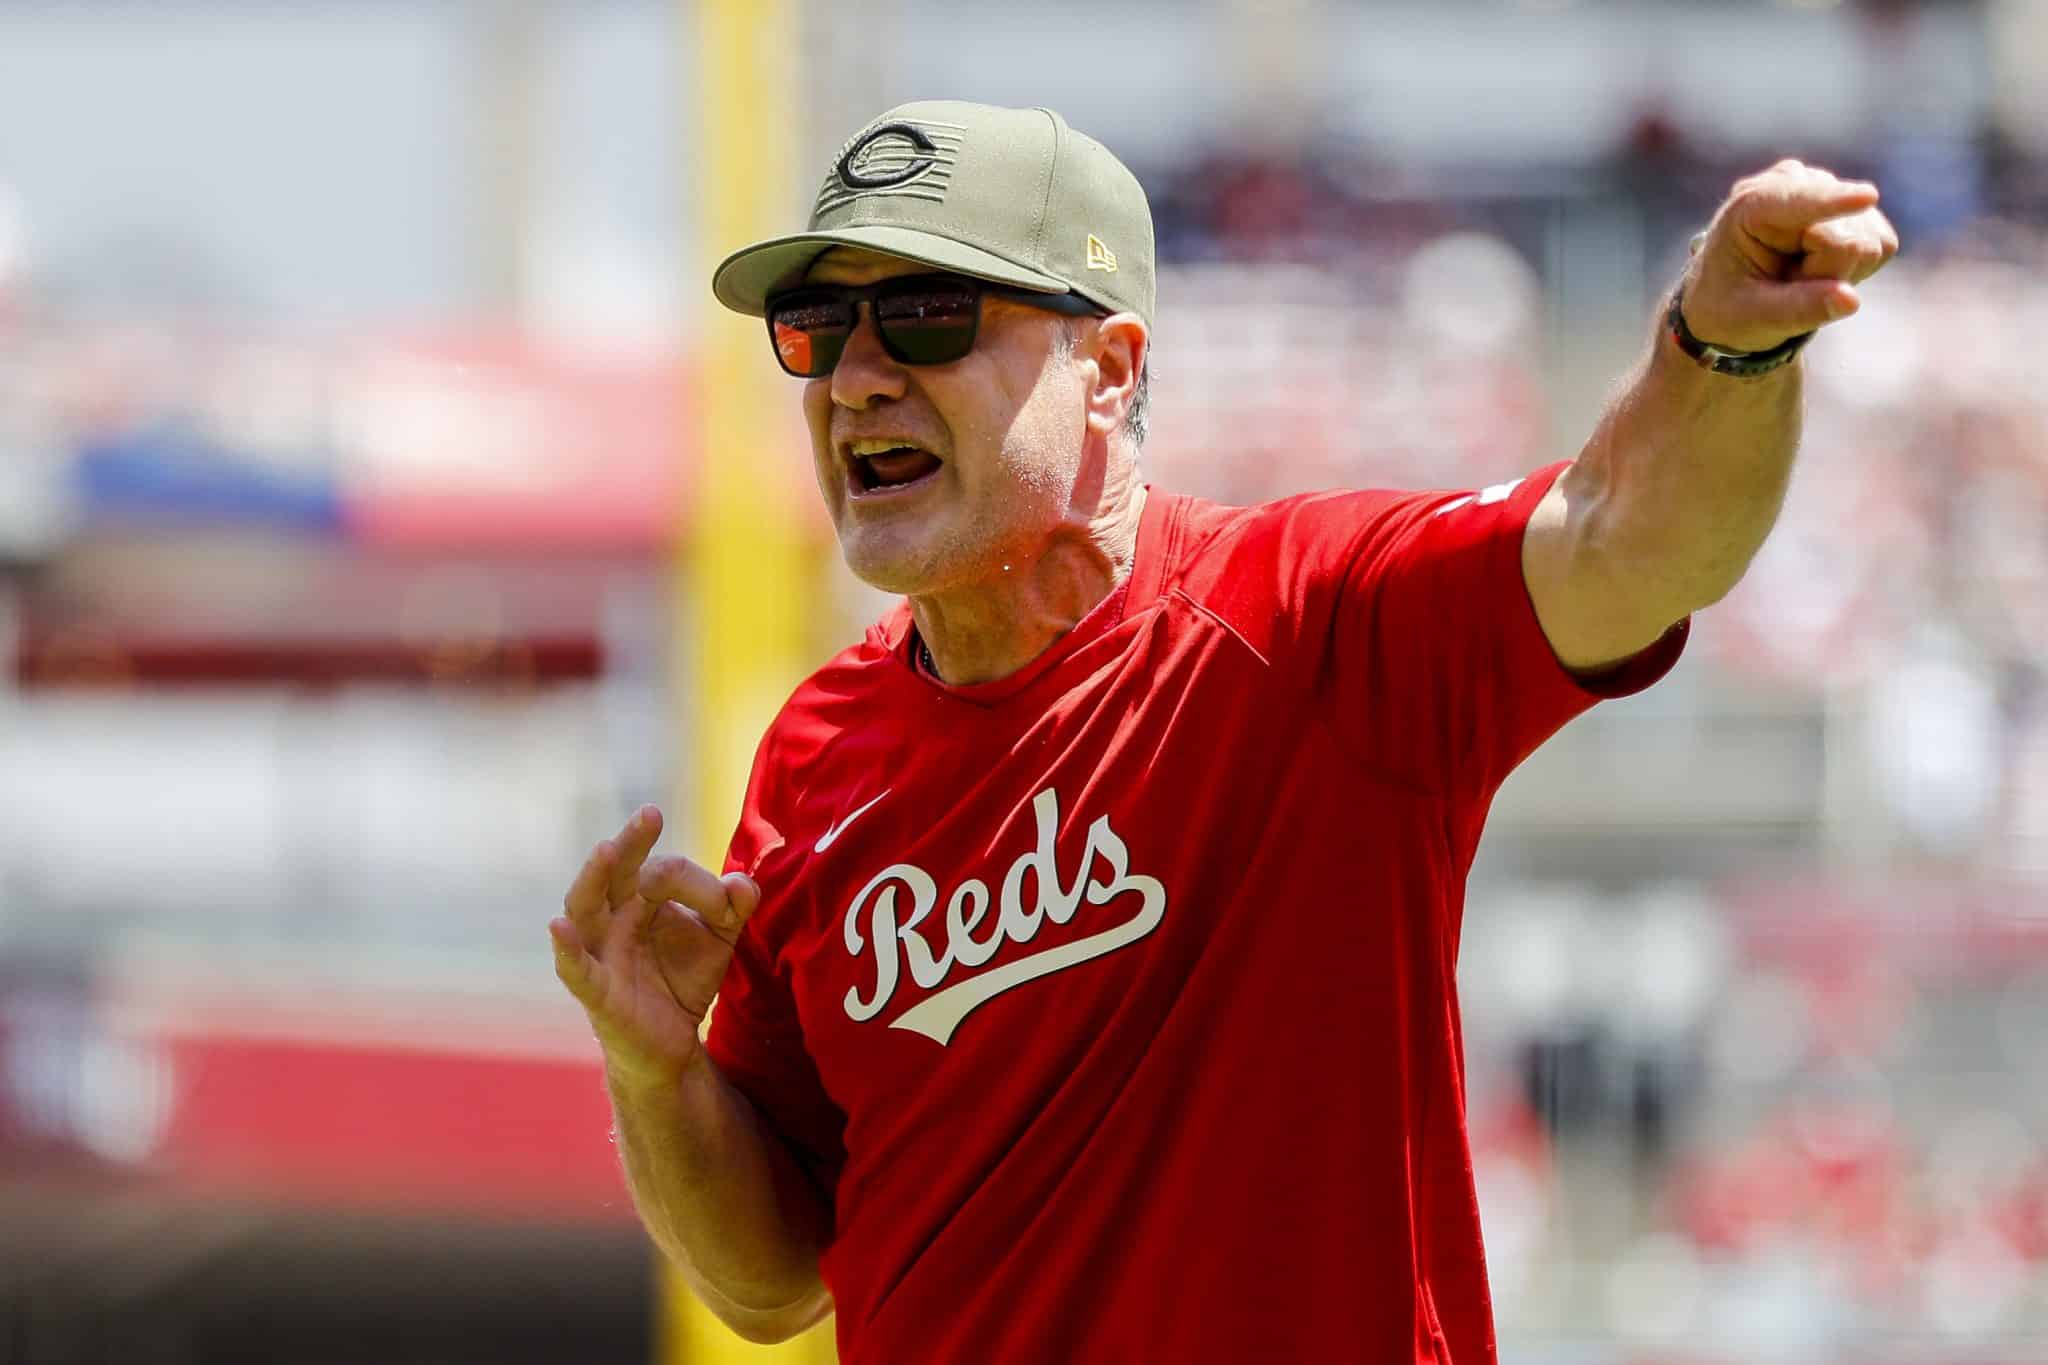 Could Reds' David Bell be a future Yankees manager?